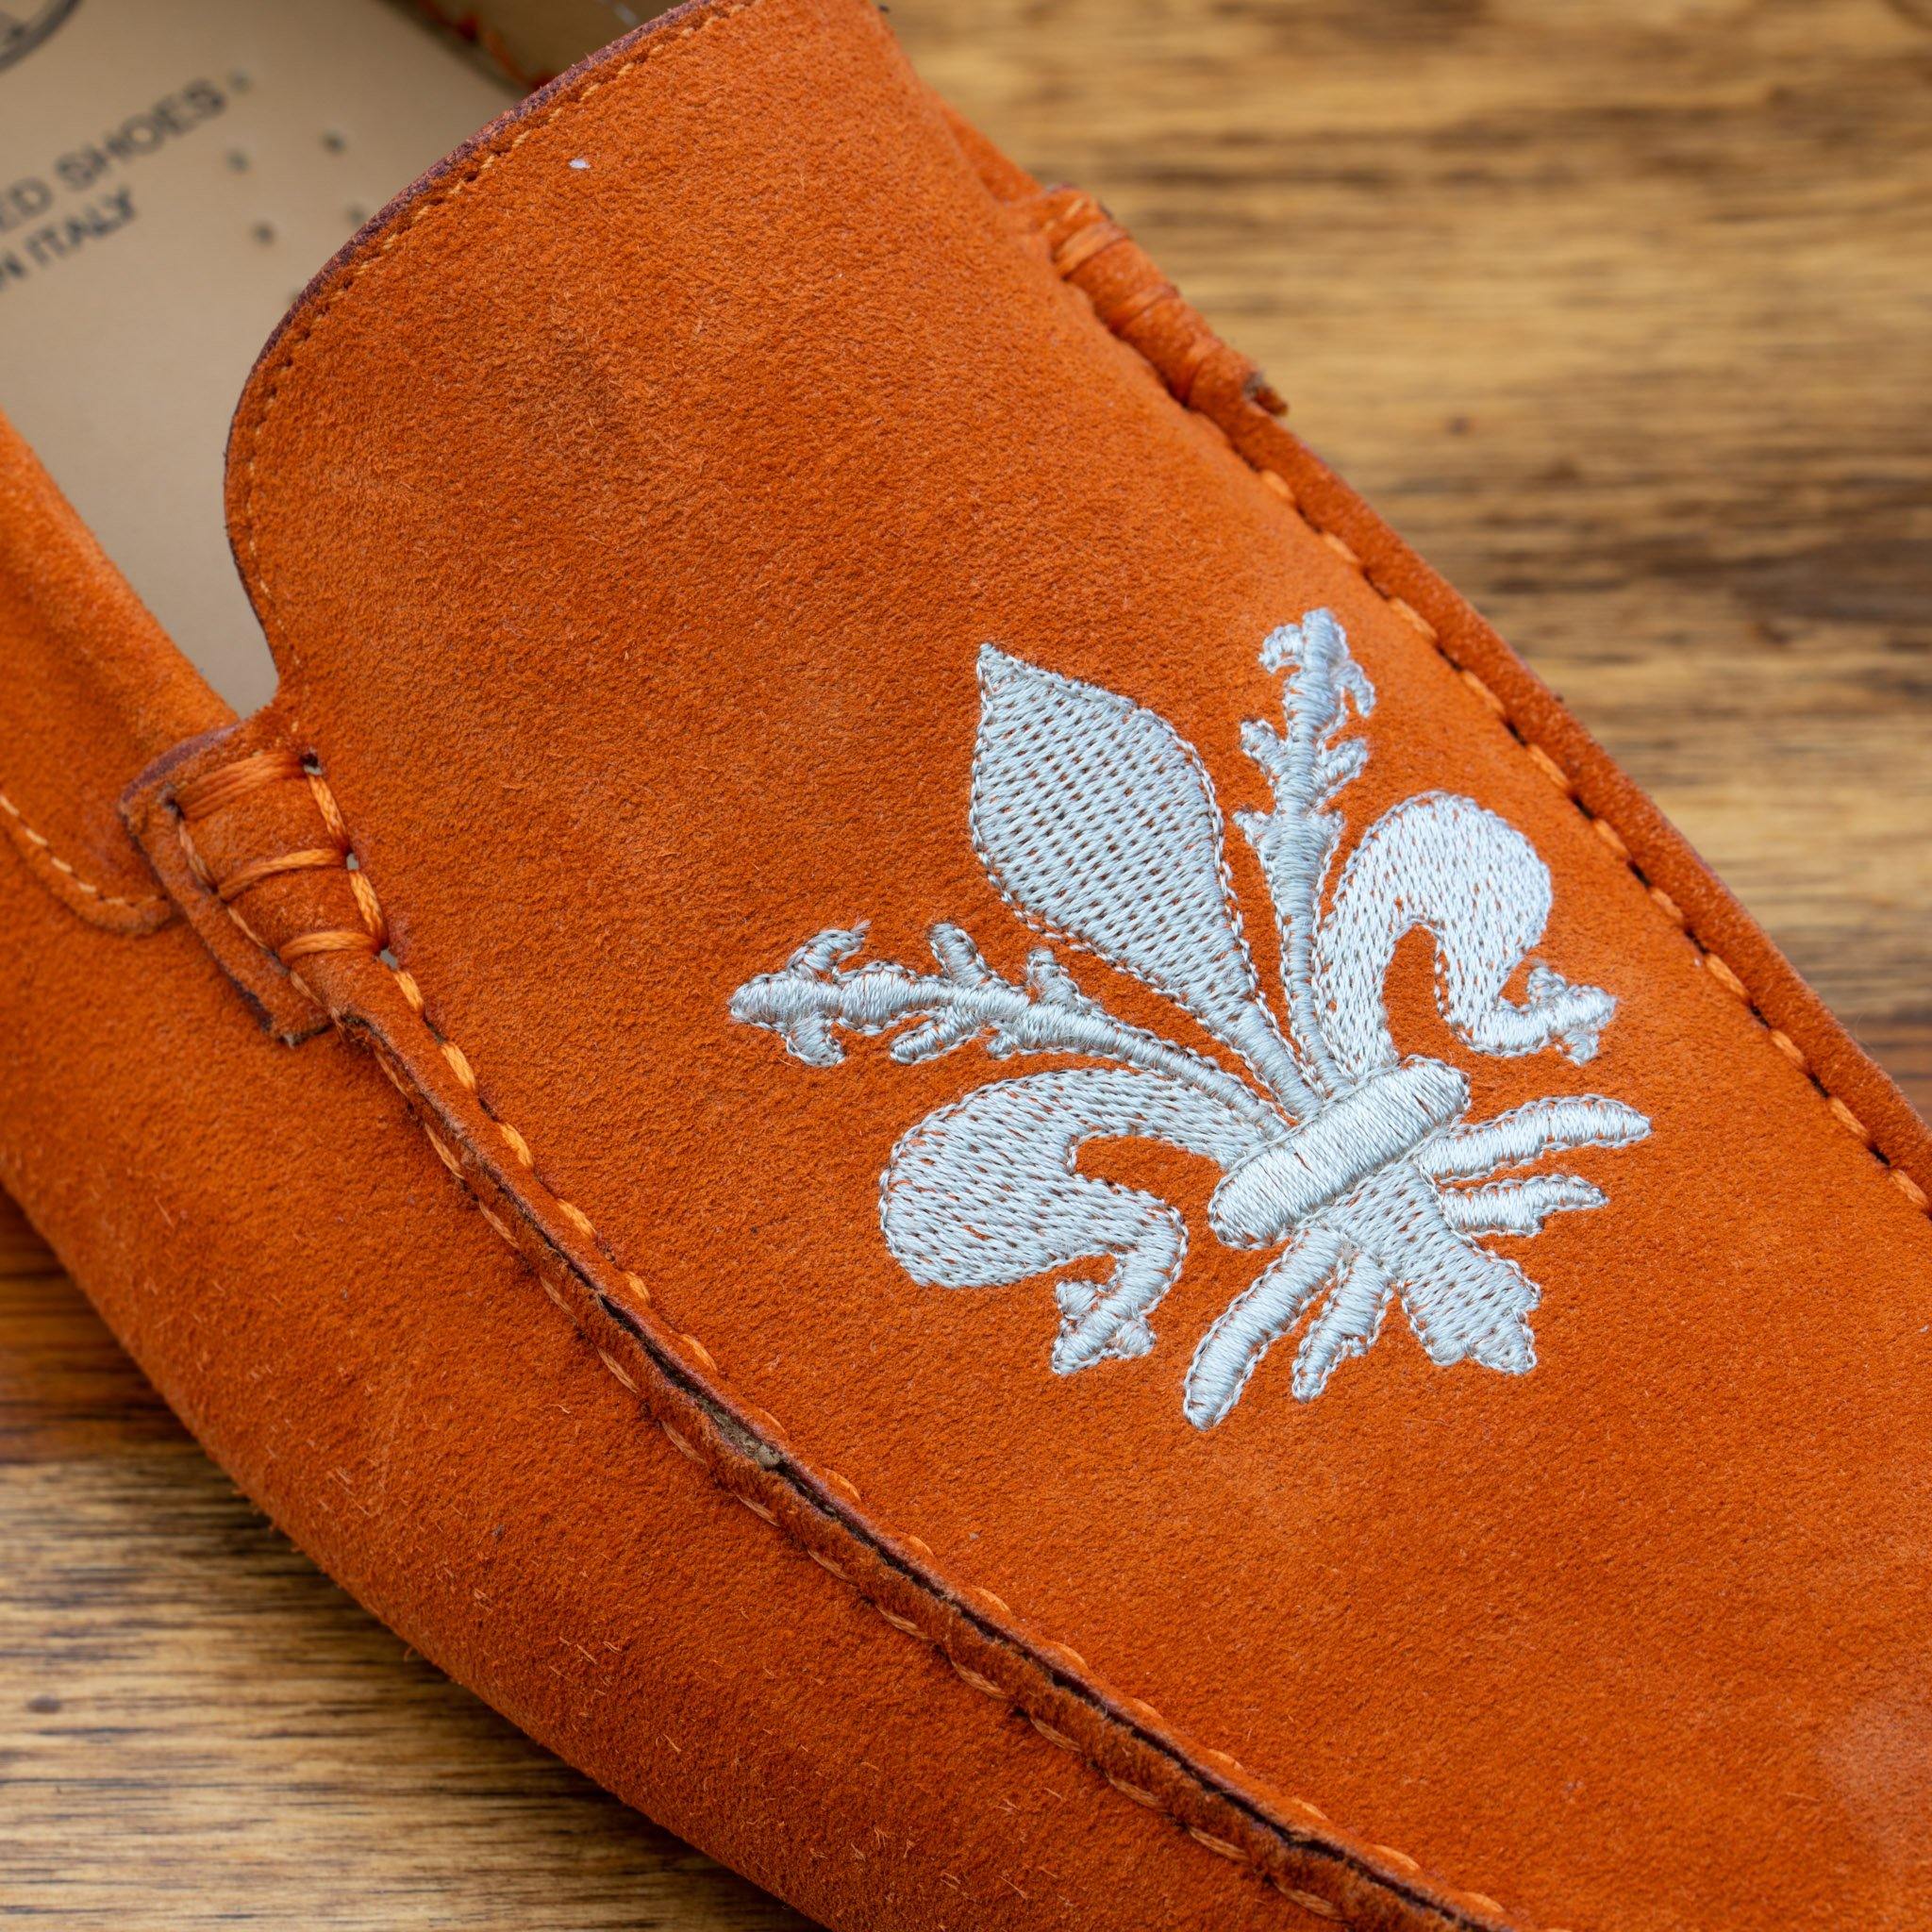 Up close picture of cream embroidered fleur di lis on 5303 Calzoleria Toscana Papaya Venetian Suede Driver